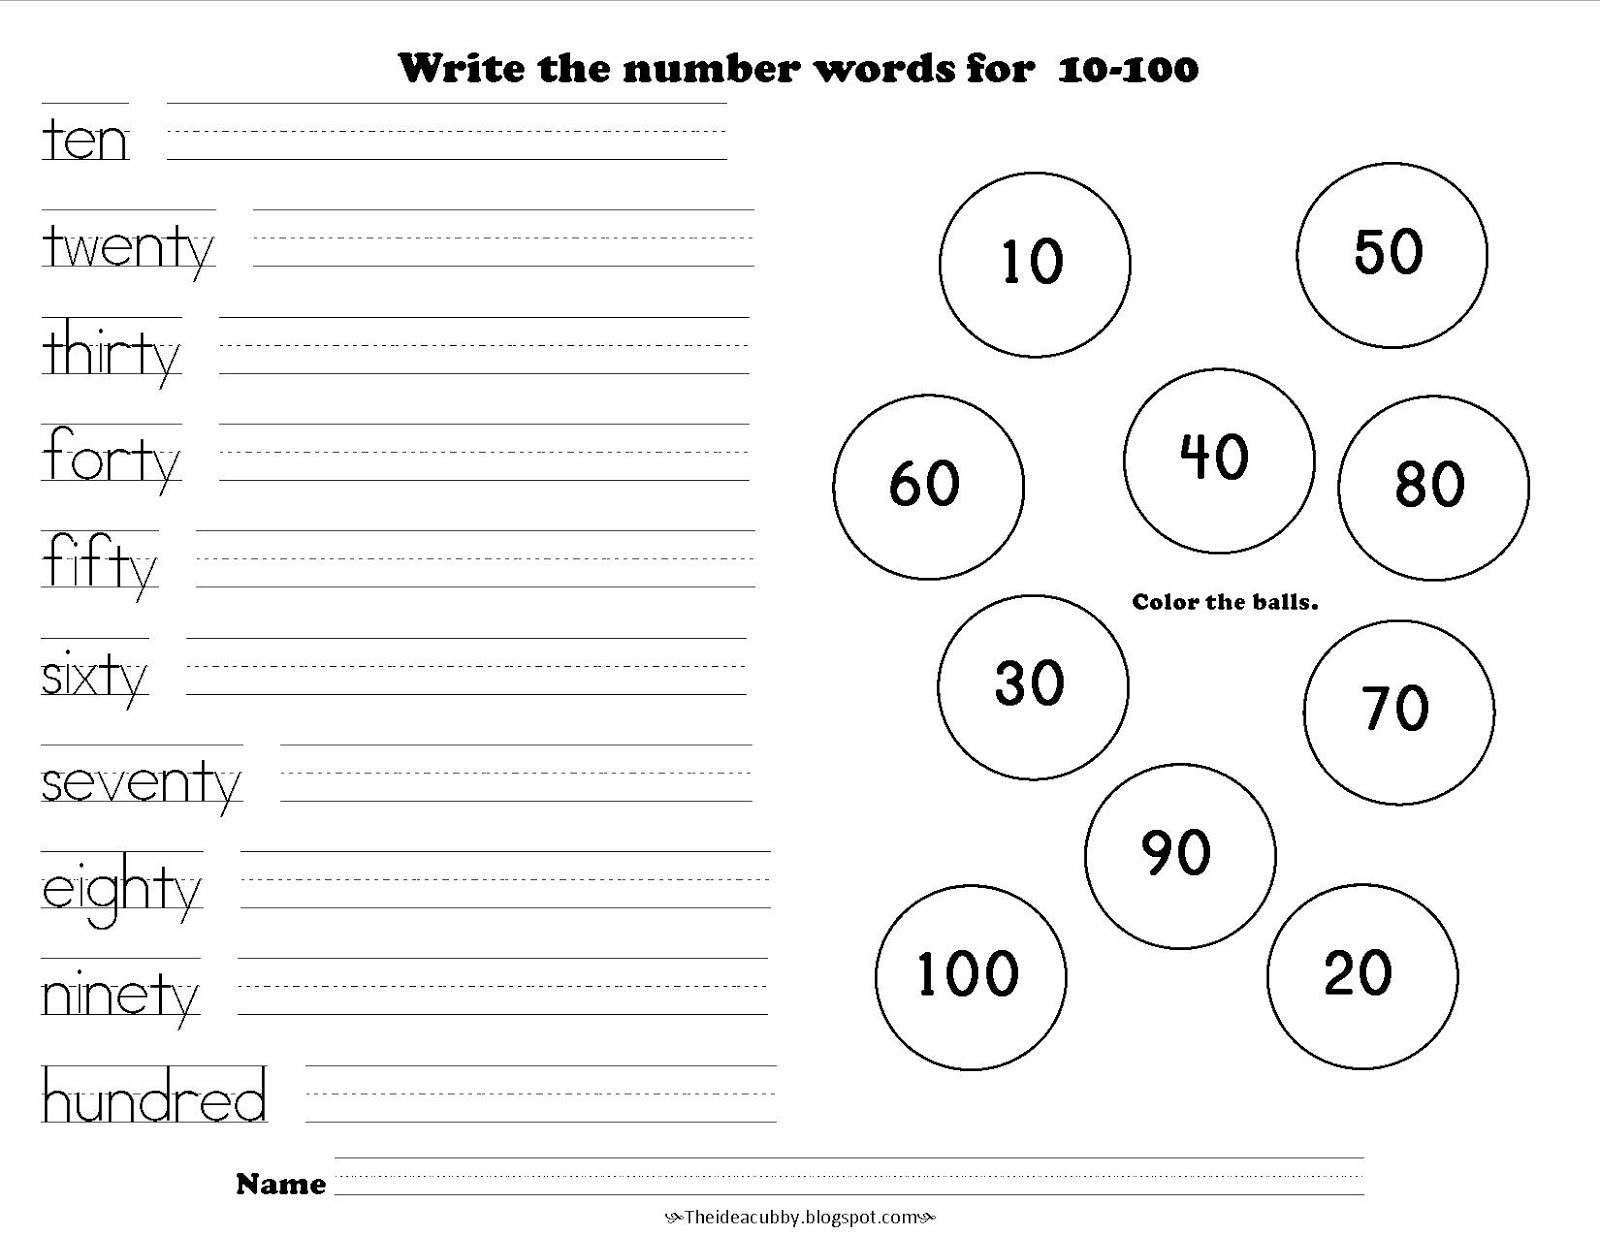 trace-number-1-20-worksheets-writing-numbers-practice